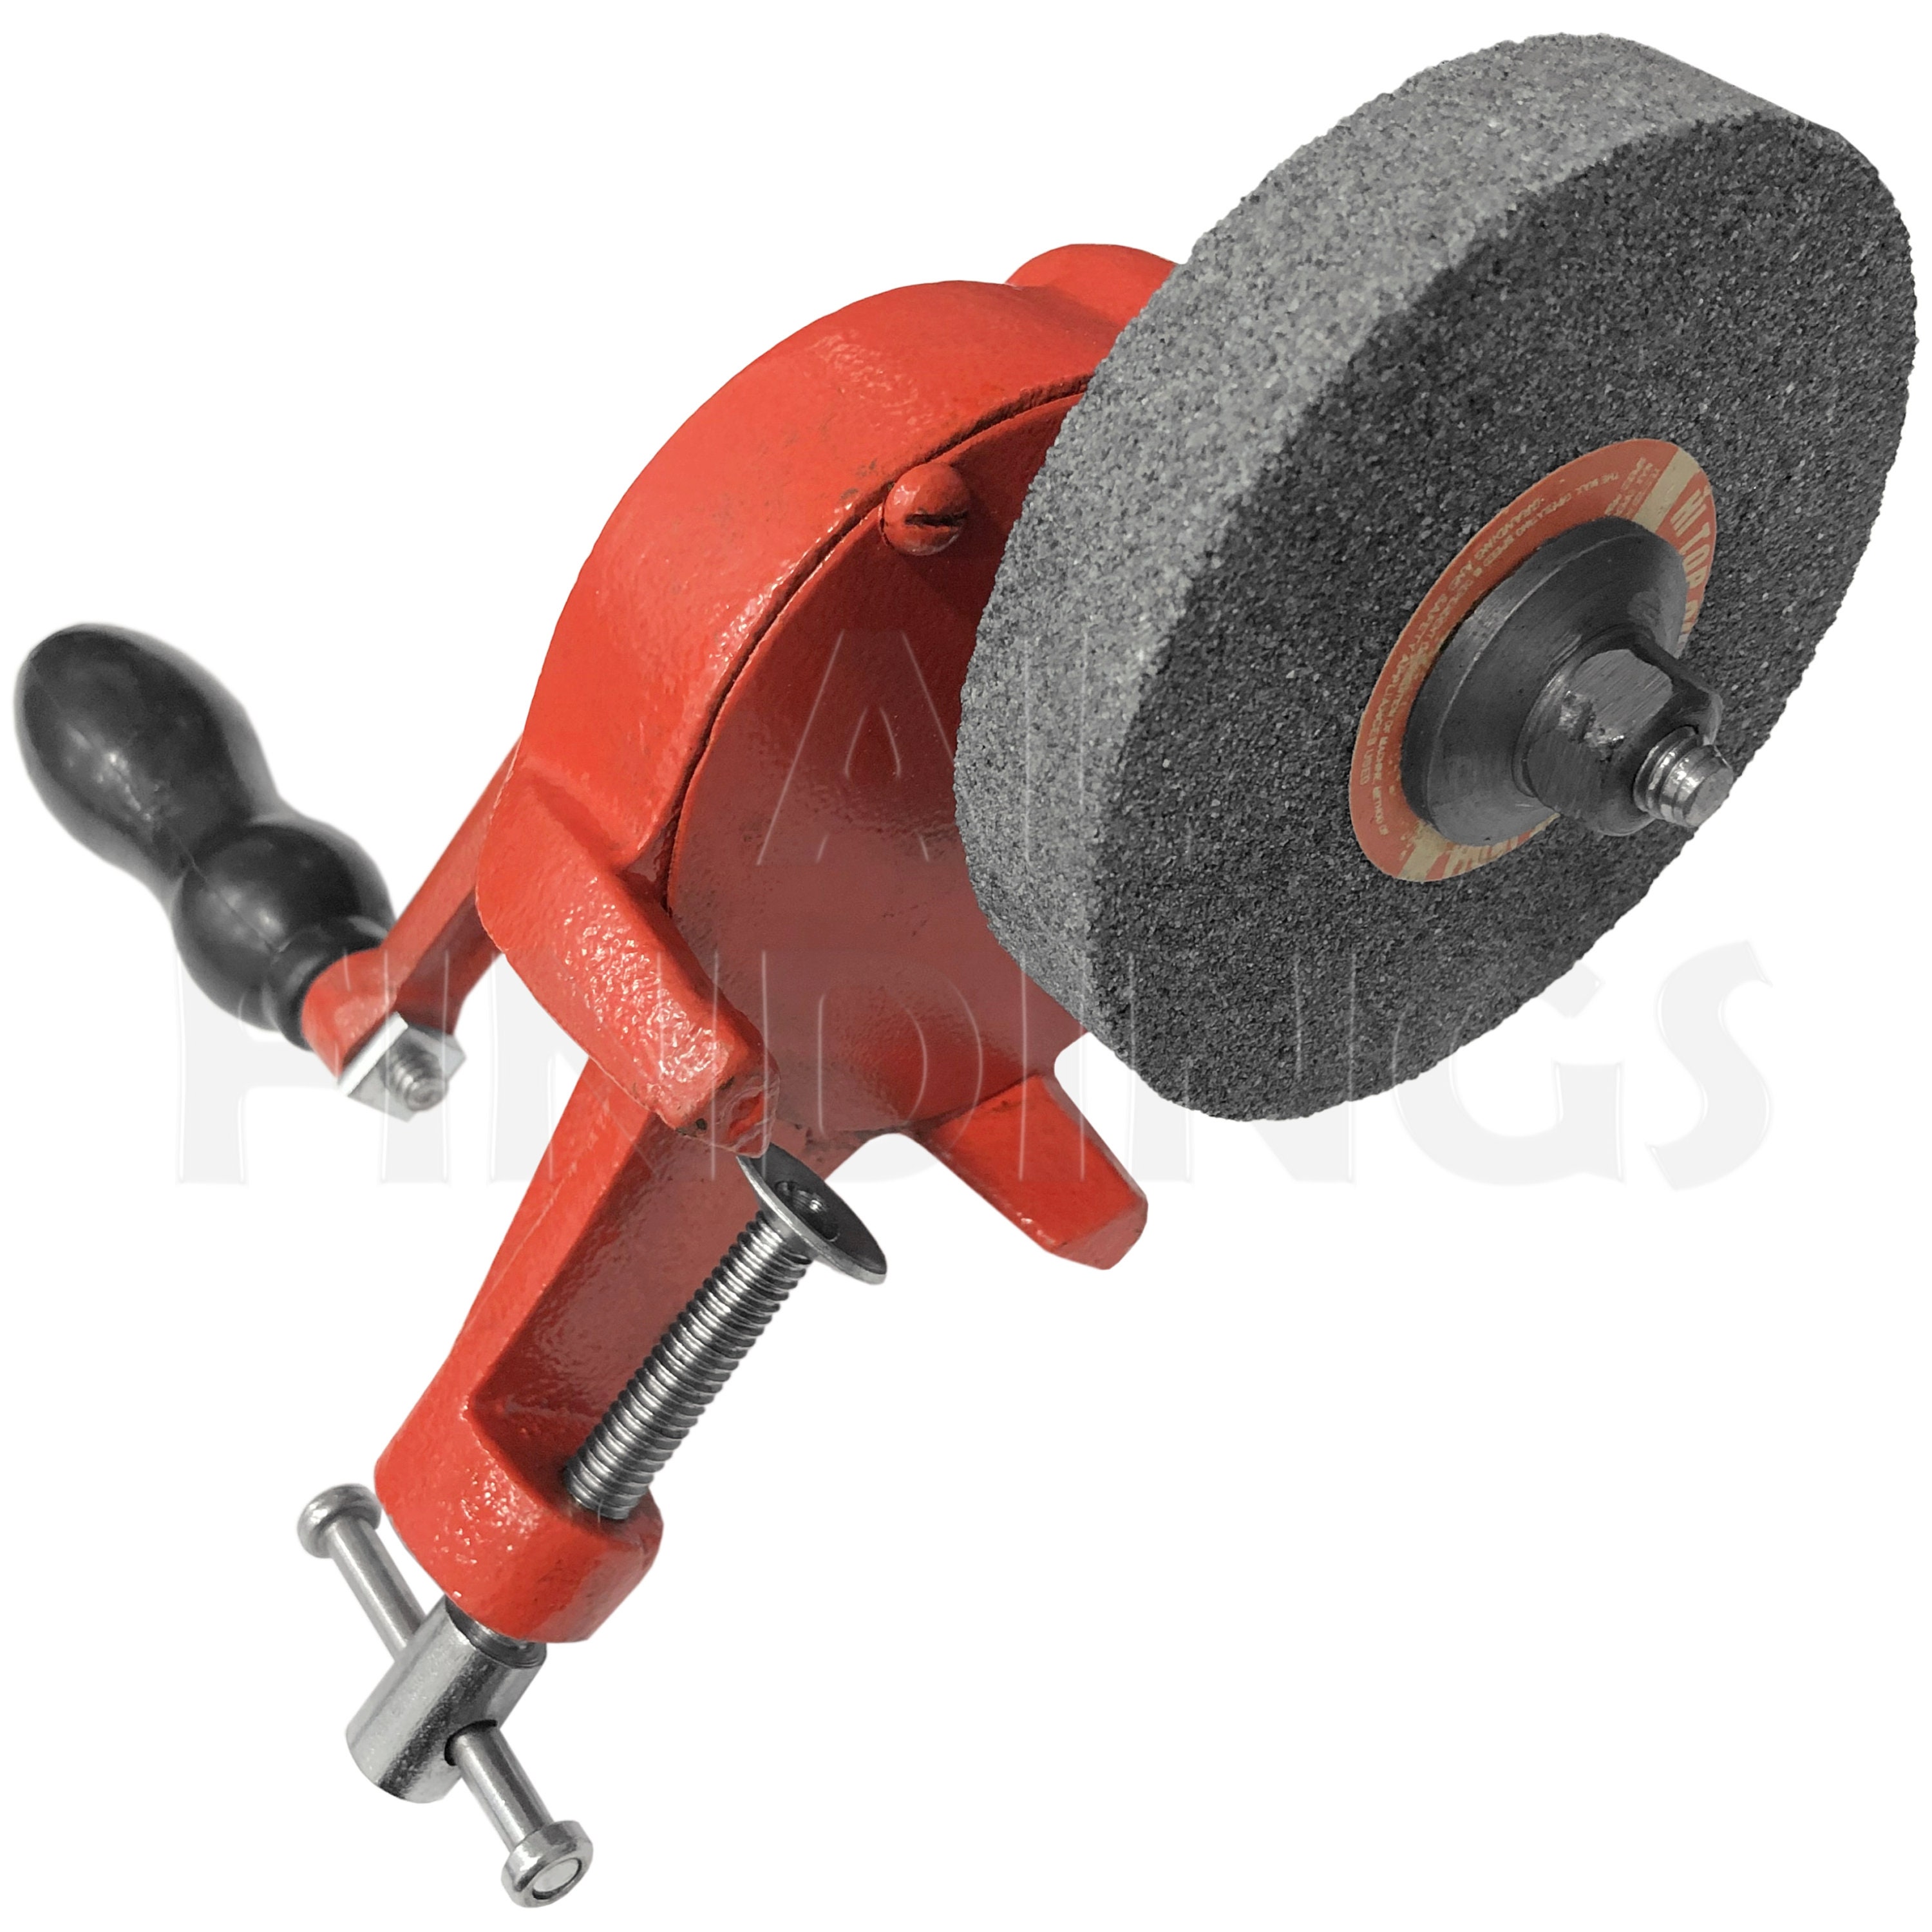 6 Hand Operated Grinding Grinder Bench Mounted Stone Jewellery